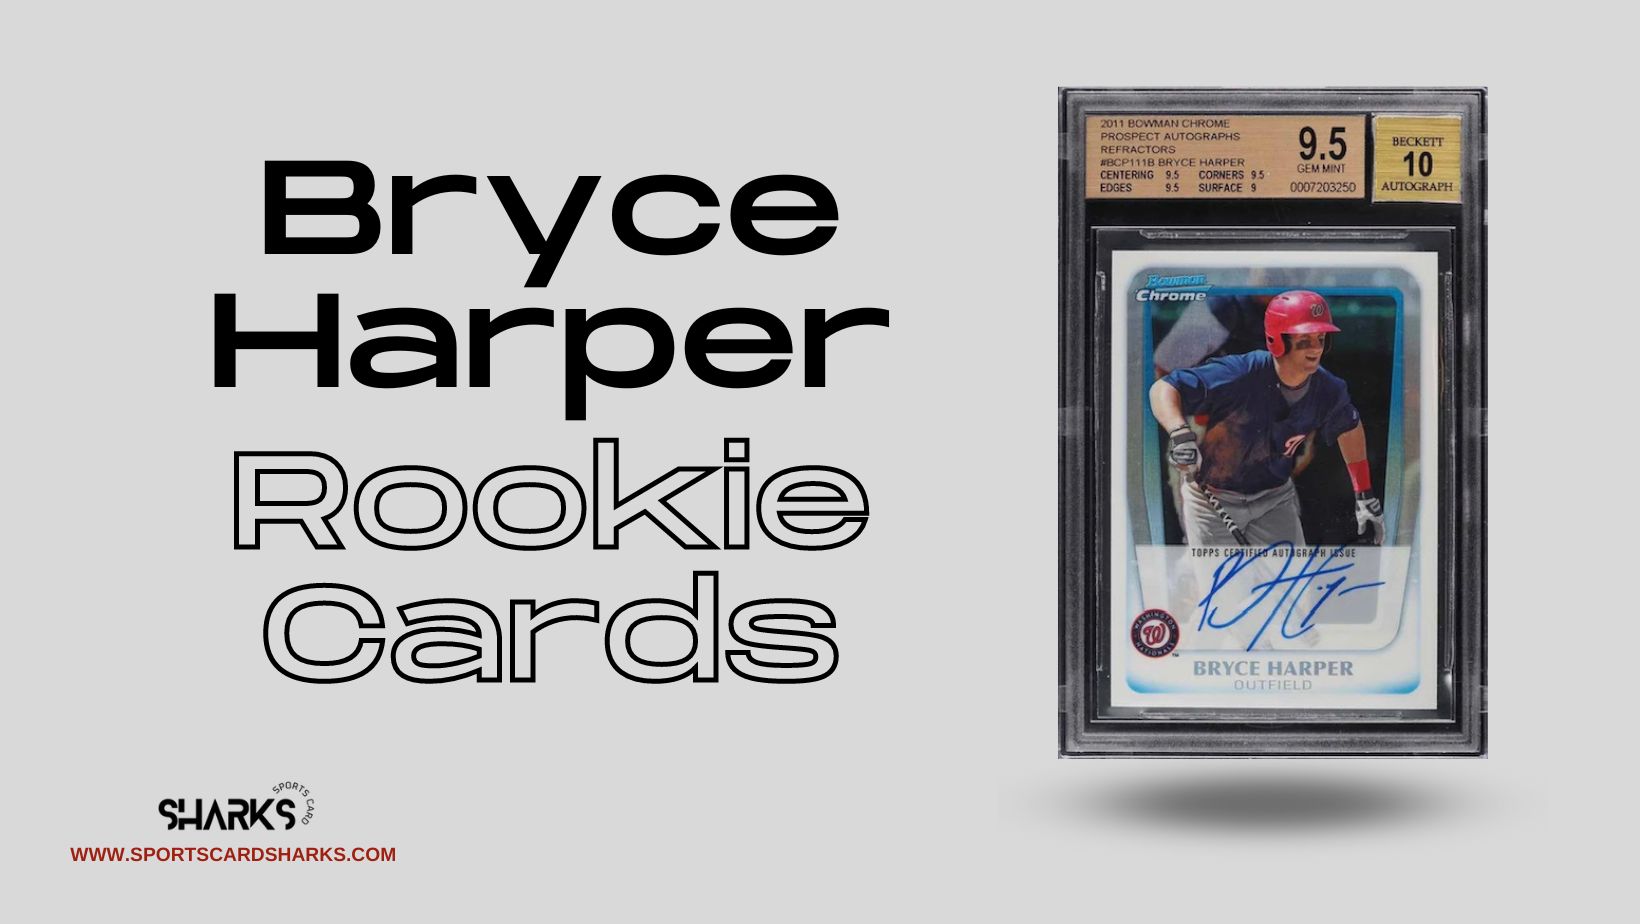 Featured image for the Best Bryce Harper Rookie Cards blog post on Sports Card Sharks